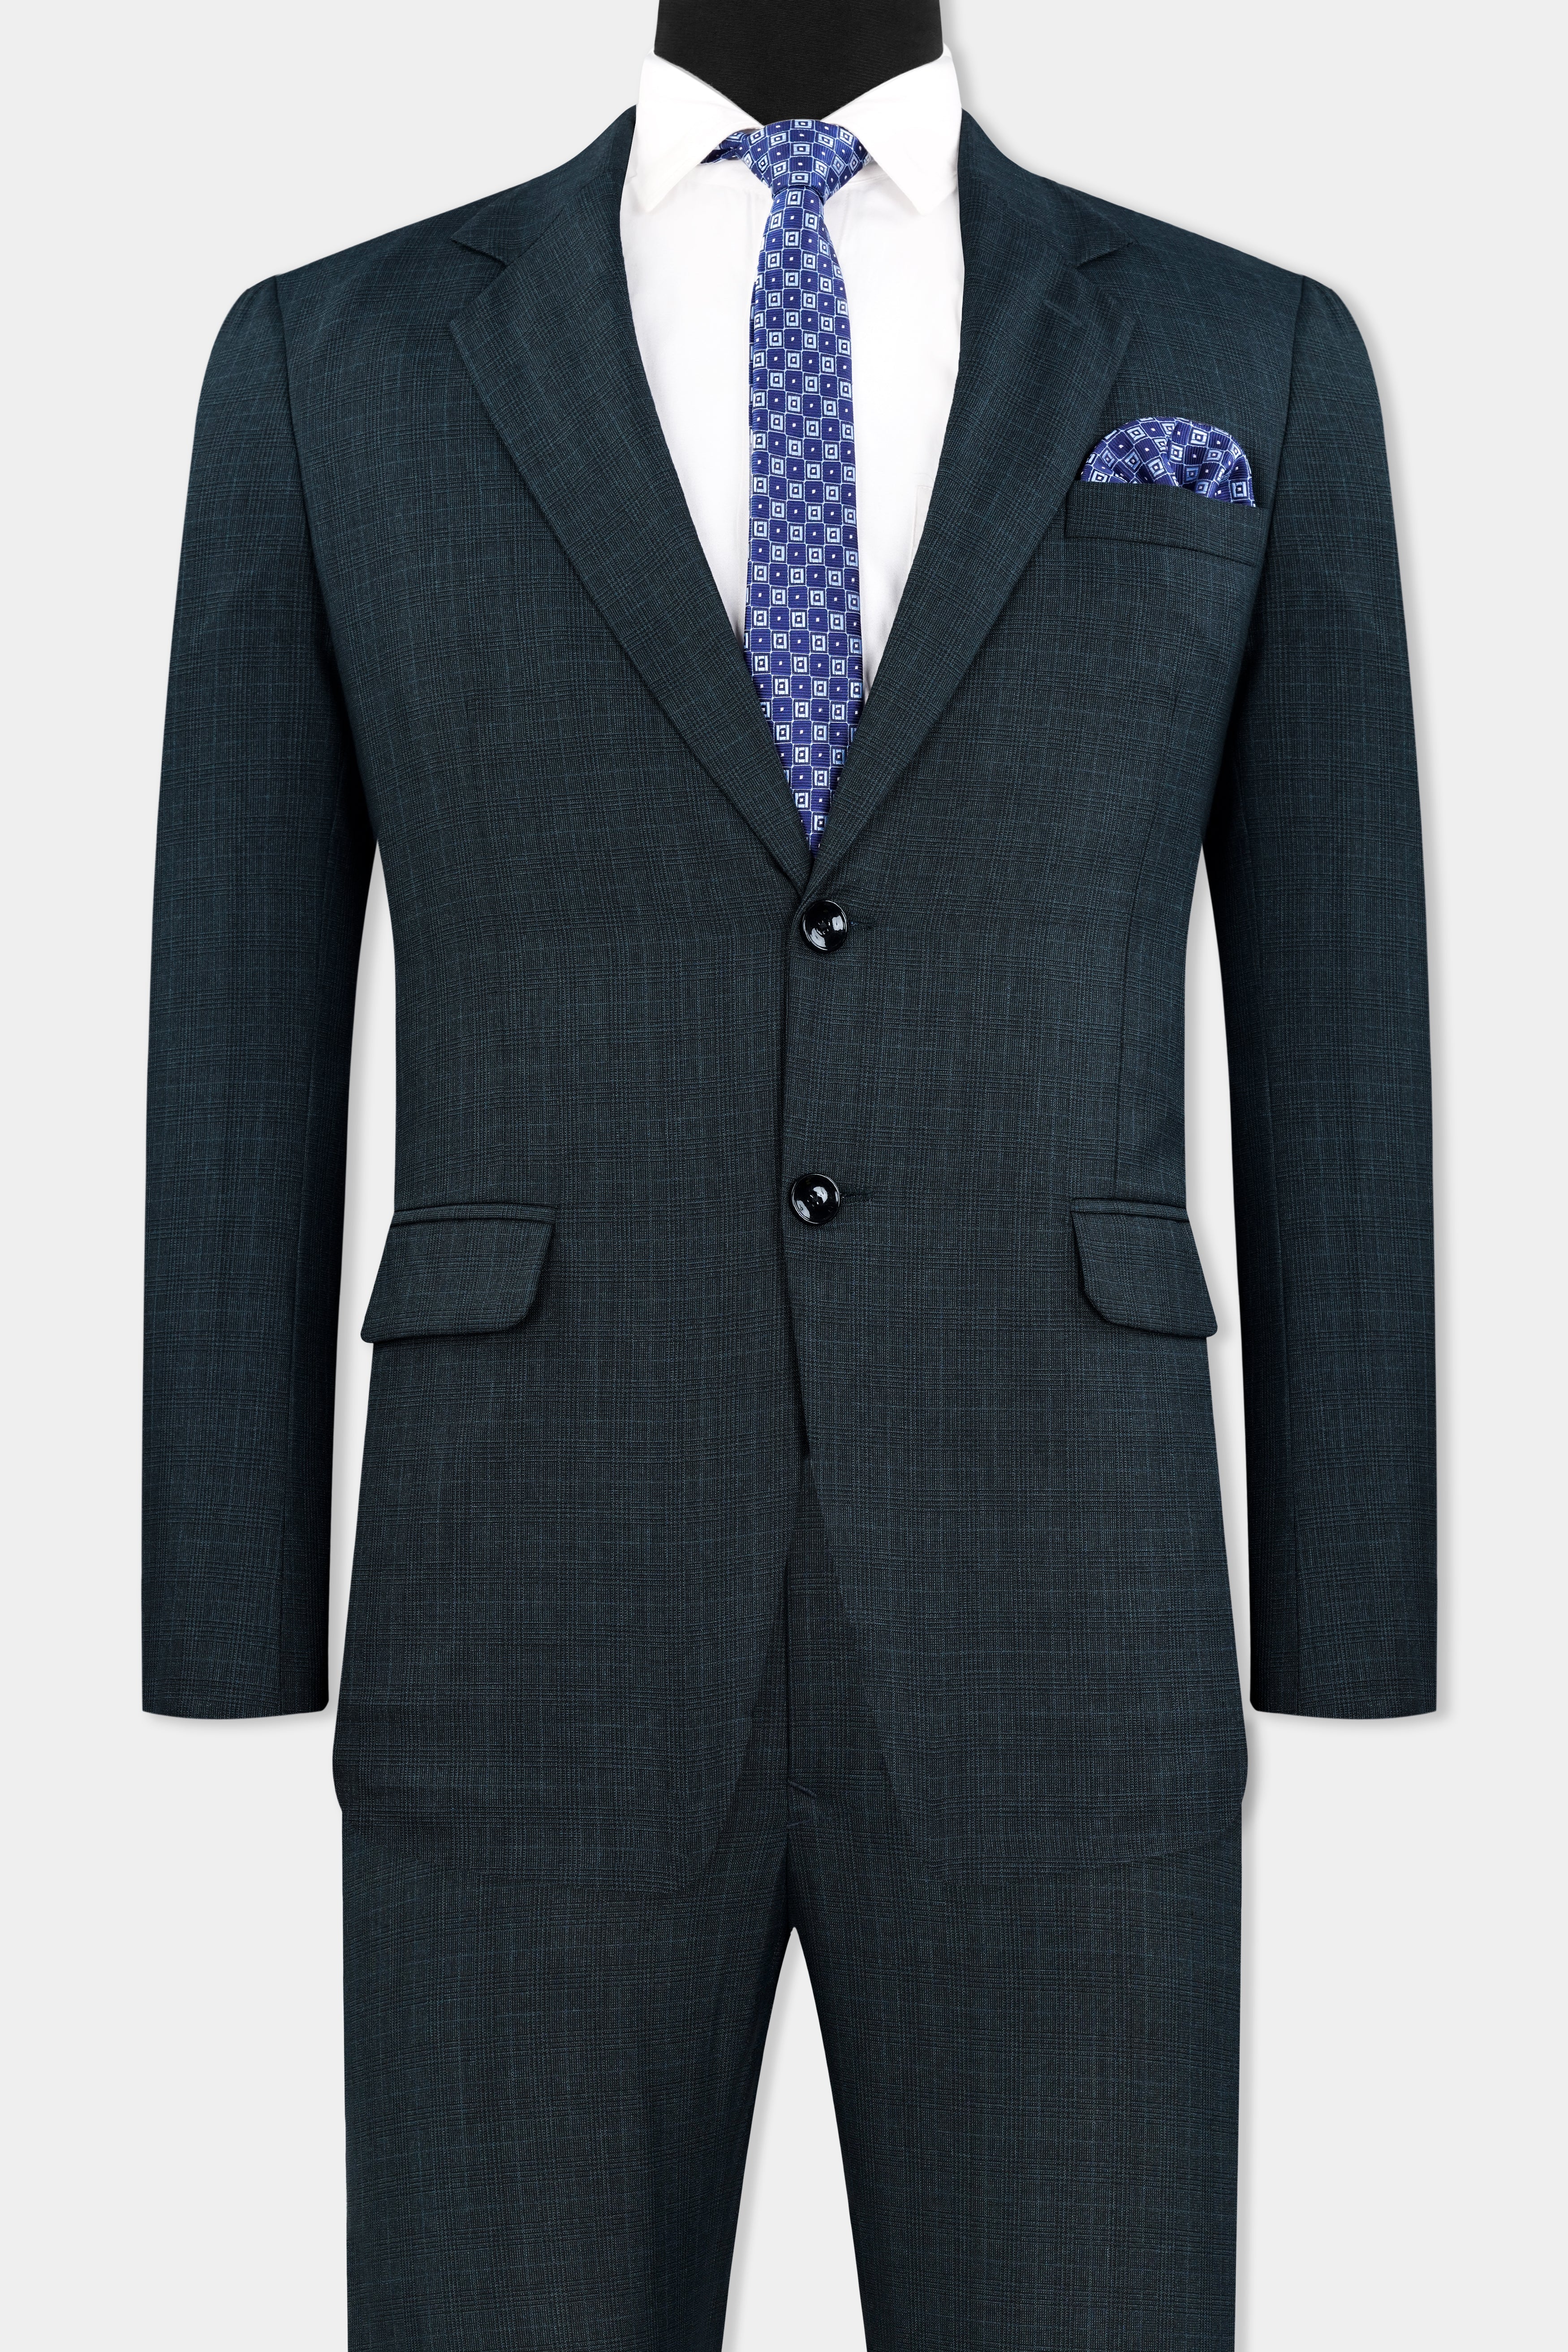 Charade Blue Wool Rich Single Breasted Suit ST2911-SB-36, ST2911-SB-38, ST2911-SB-40, ST2911-SB-42, ST2911-SB-44, ST2911-SB-46, ST2911-SB-48, ST2911-SB-50, ST2911-SB-52, ST2911-SB-54, ST2911-SB-56, ST2911-SB-58, ST2911-SB-60